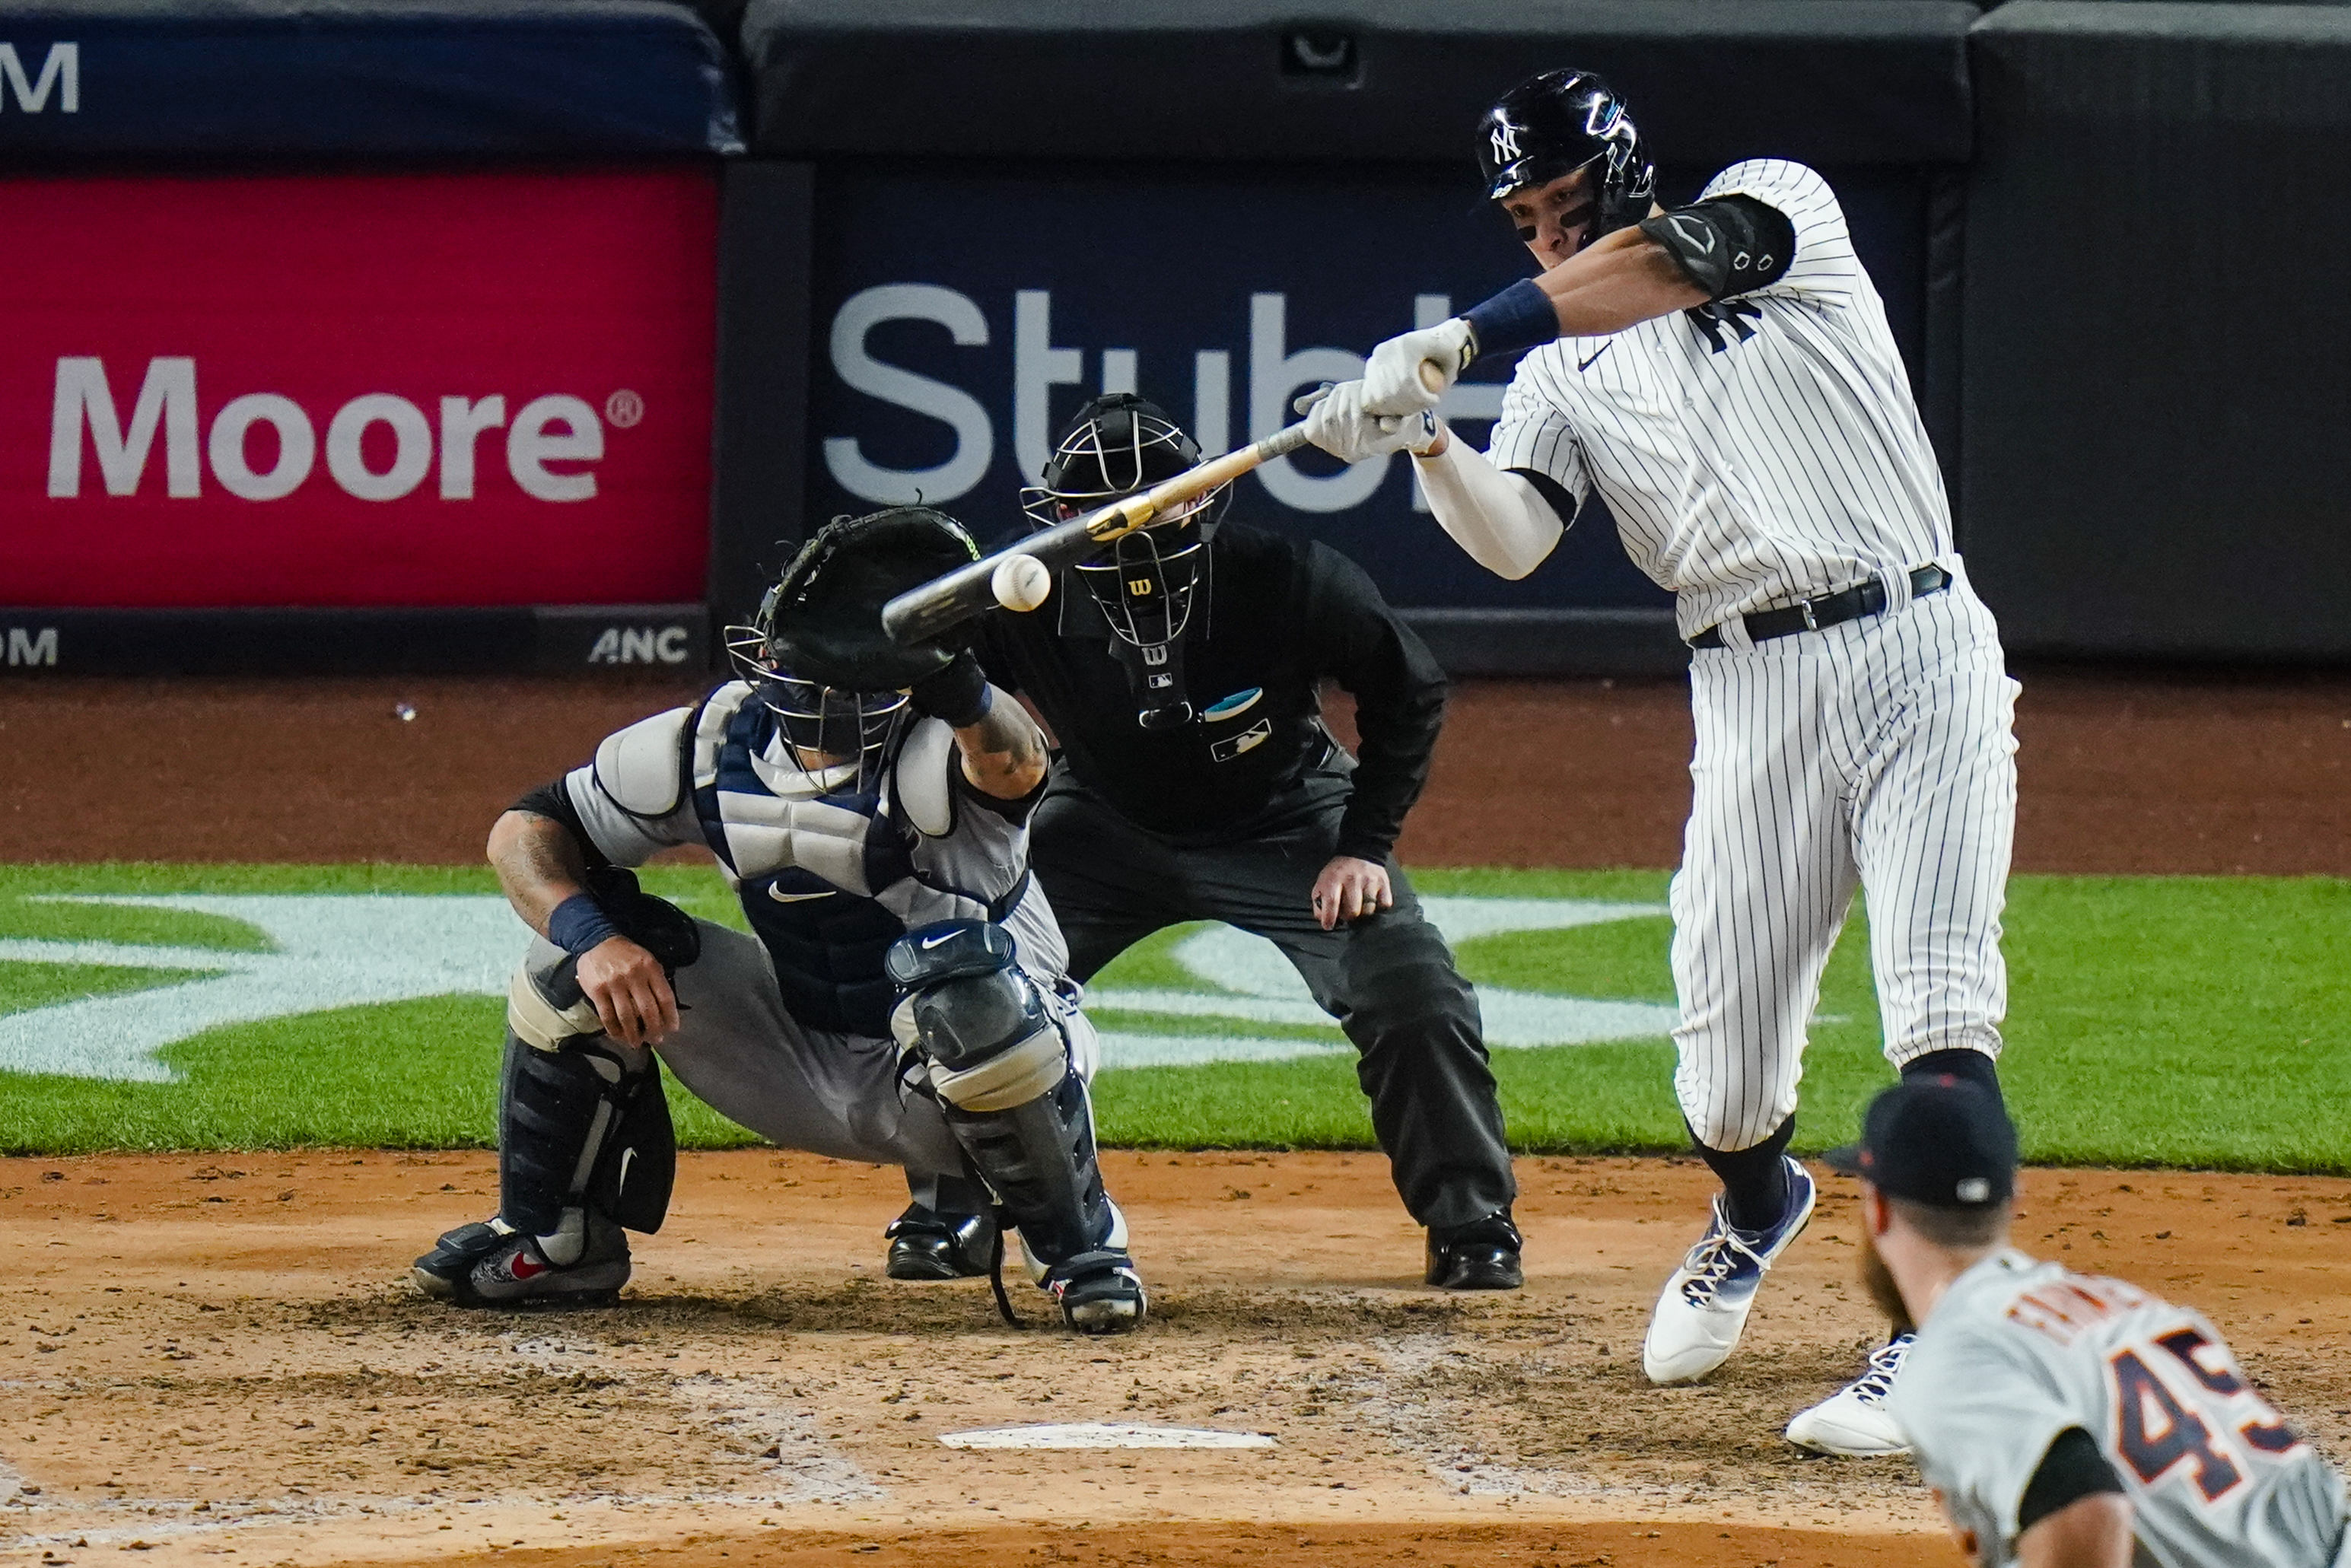 Aaron Judge Homers, and Yankees Pile On in a 7-Run Sixth - The New